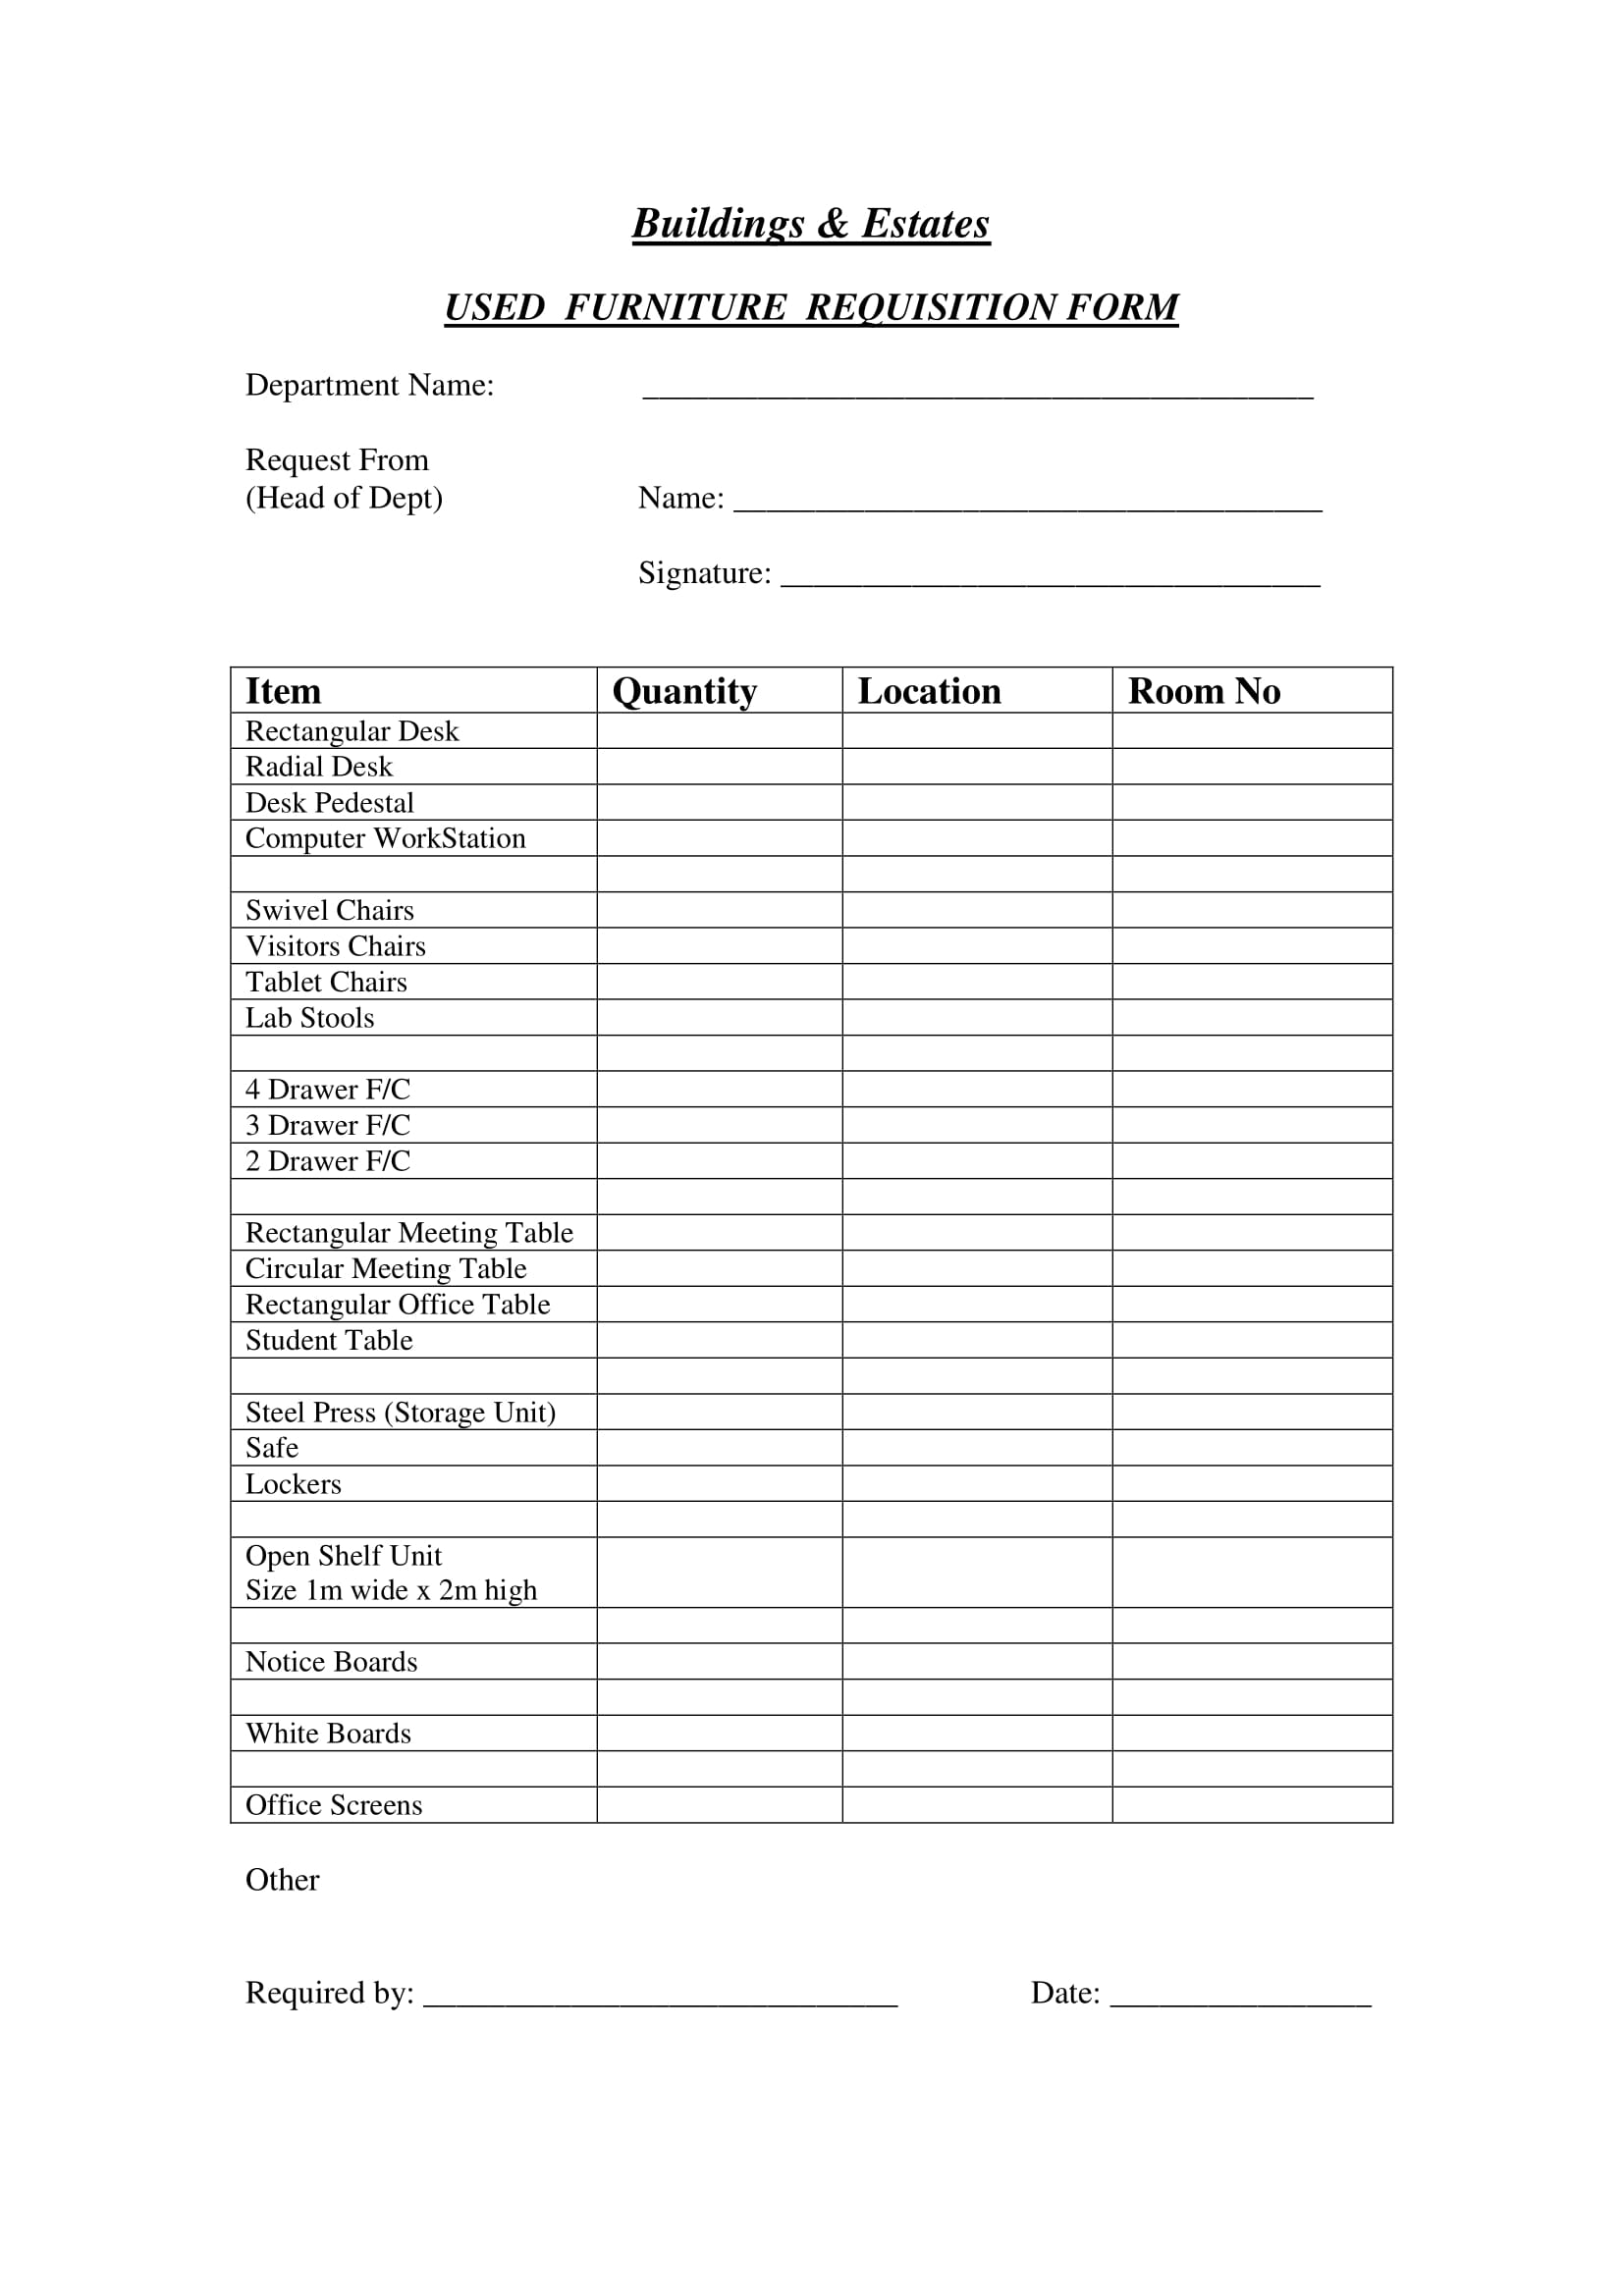 furniture requisition form 1